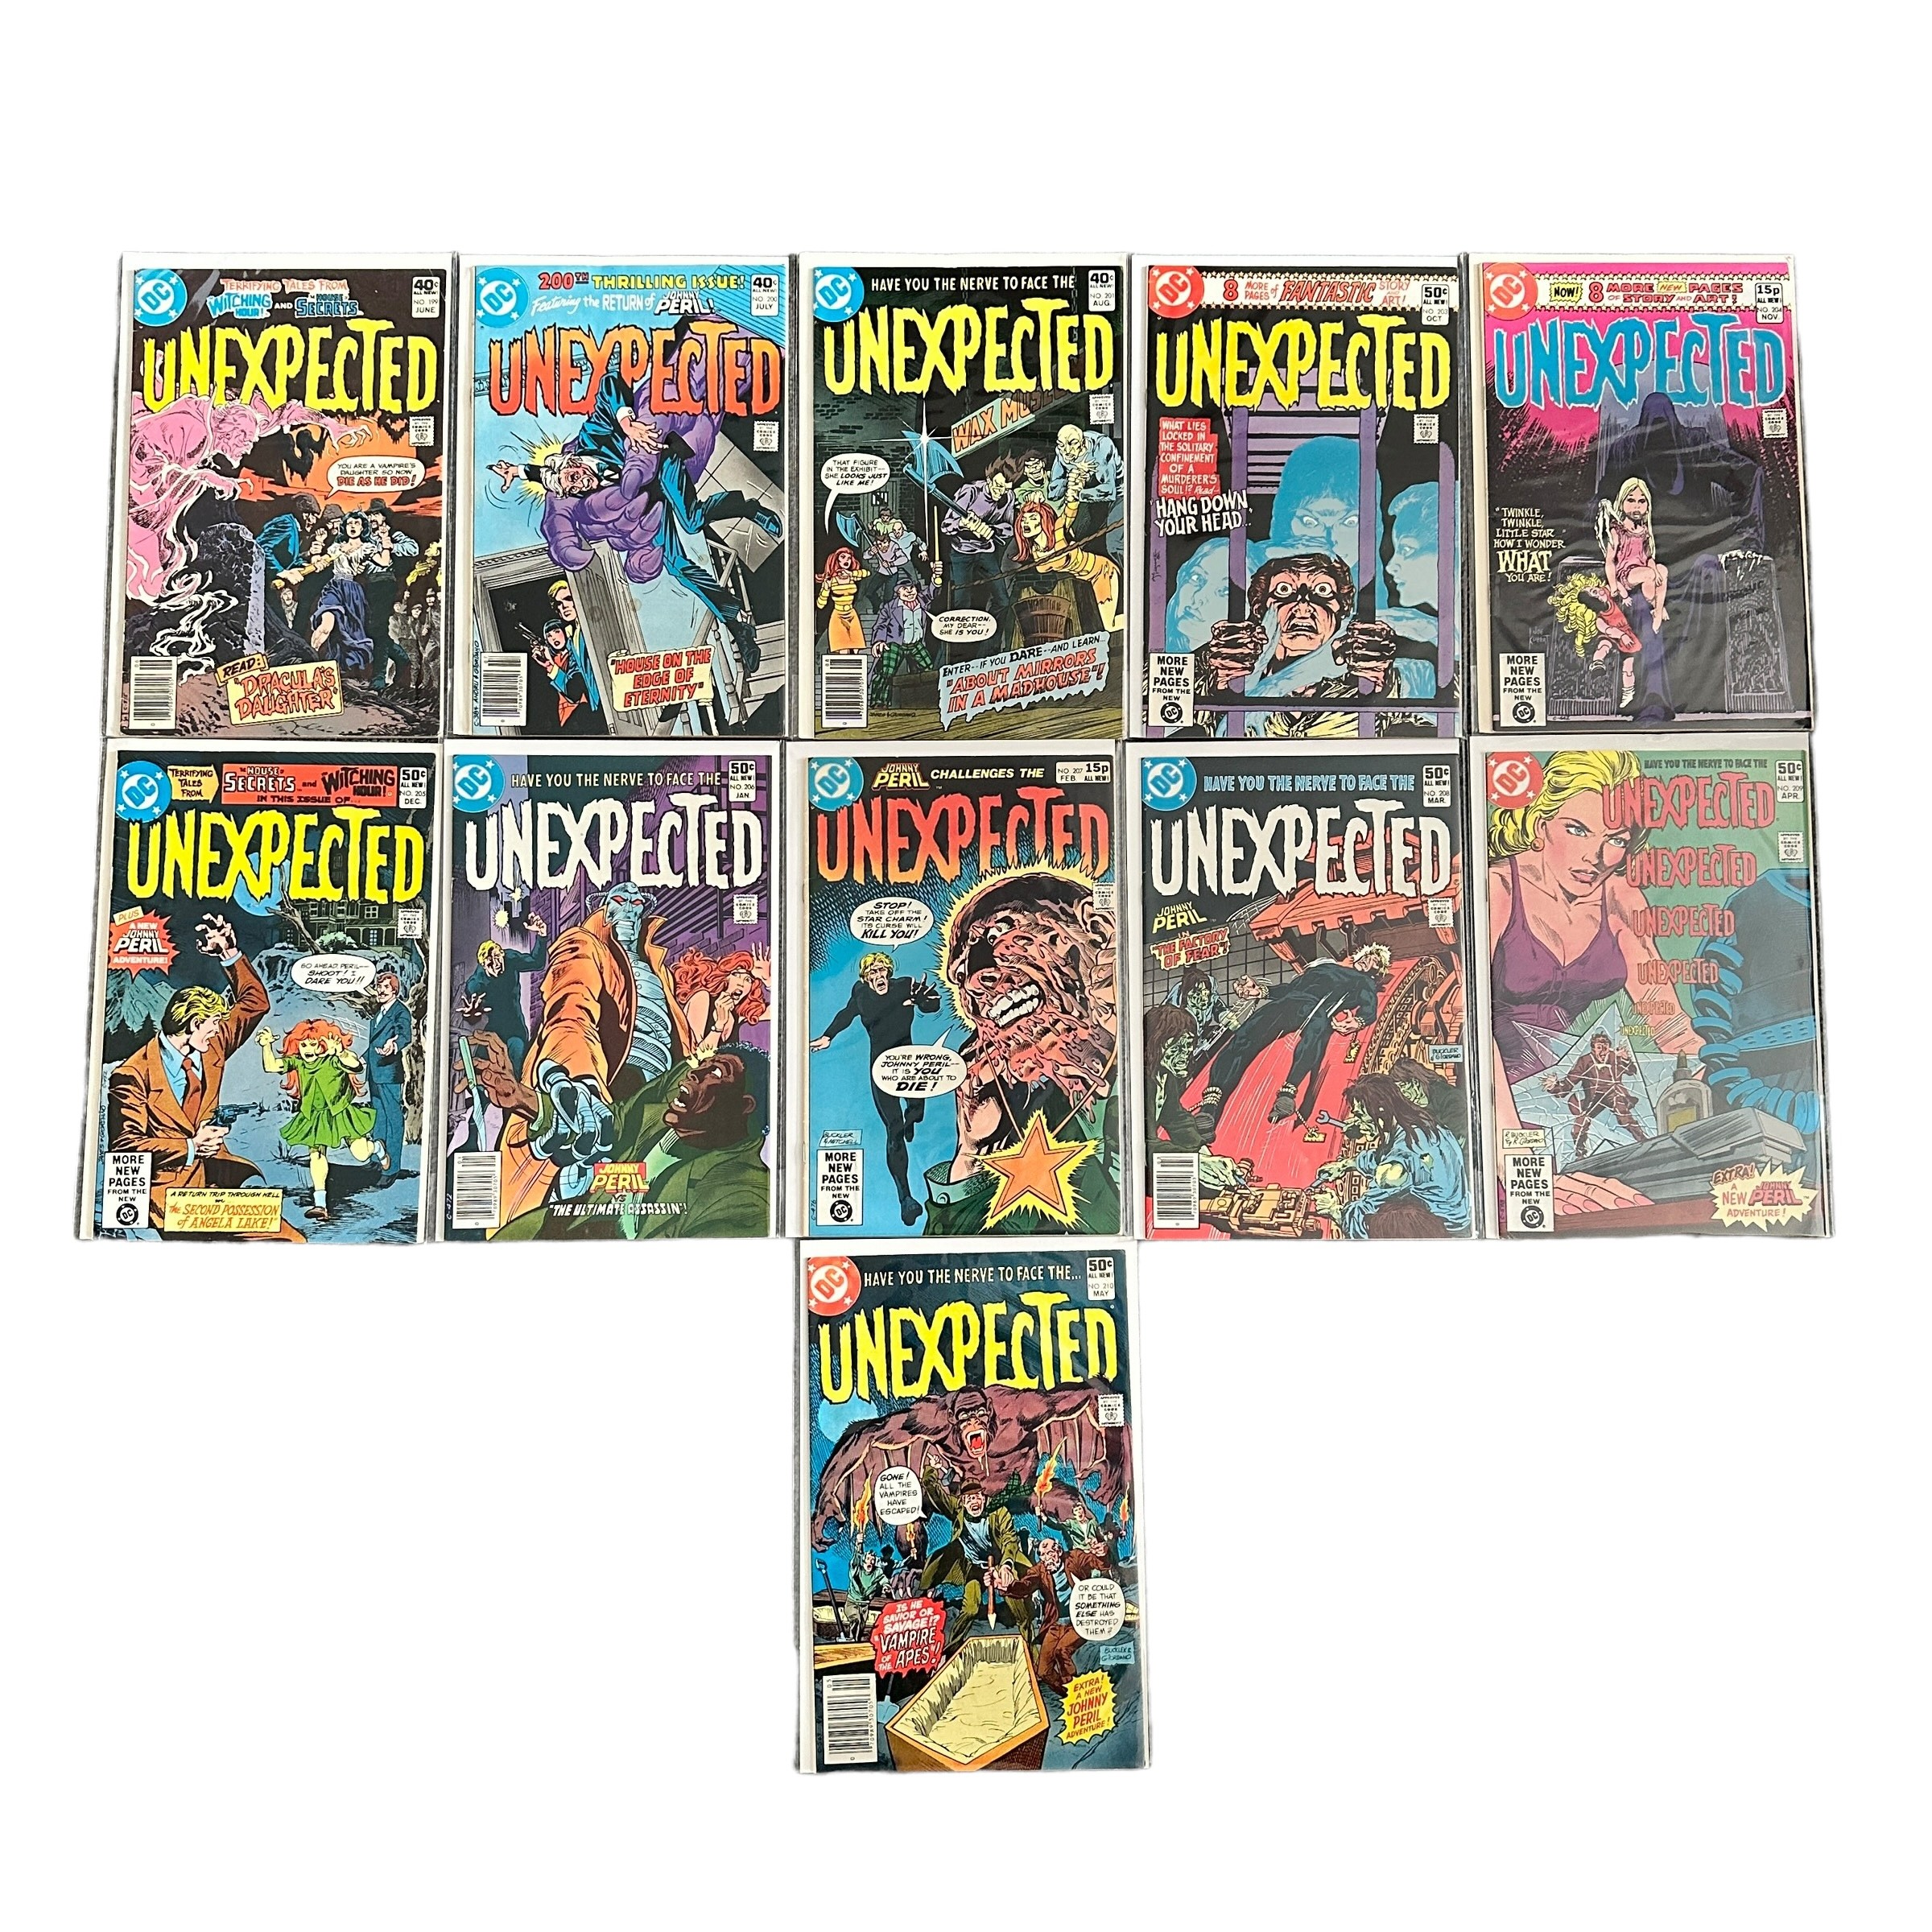 DC Comics Unexpected 1980s Nos 199-201, 203-210, 212-219, 221-222: All 21 comics bagged & boarded,